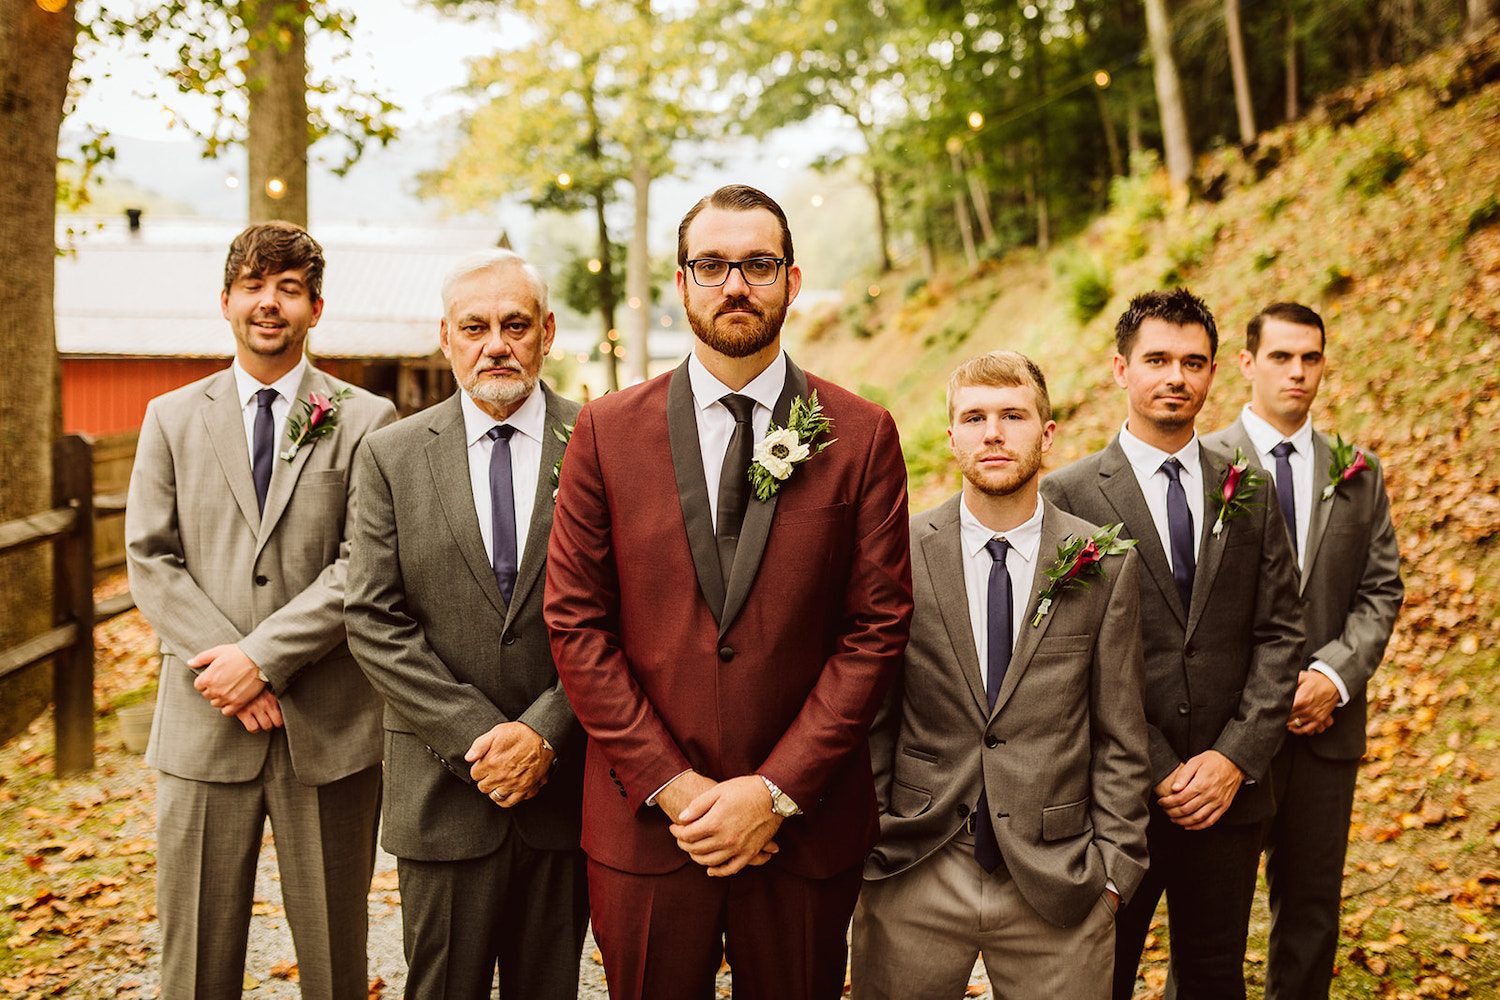 Groom in maroon suit and groomsmen in gray suits stand in a V-formation